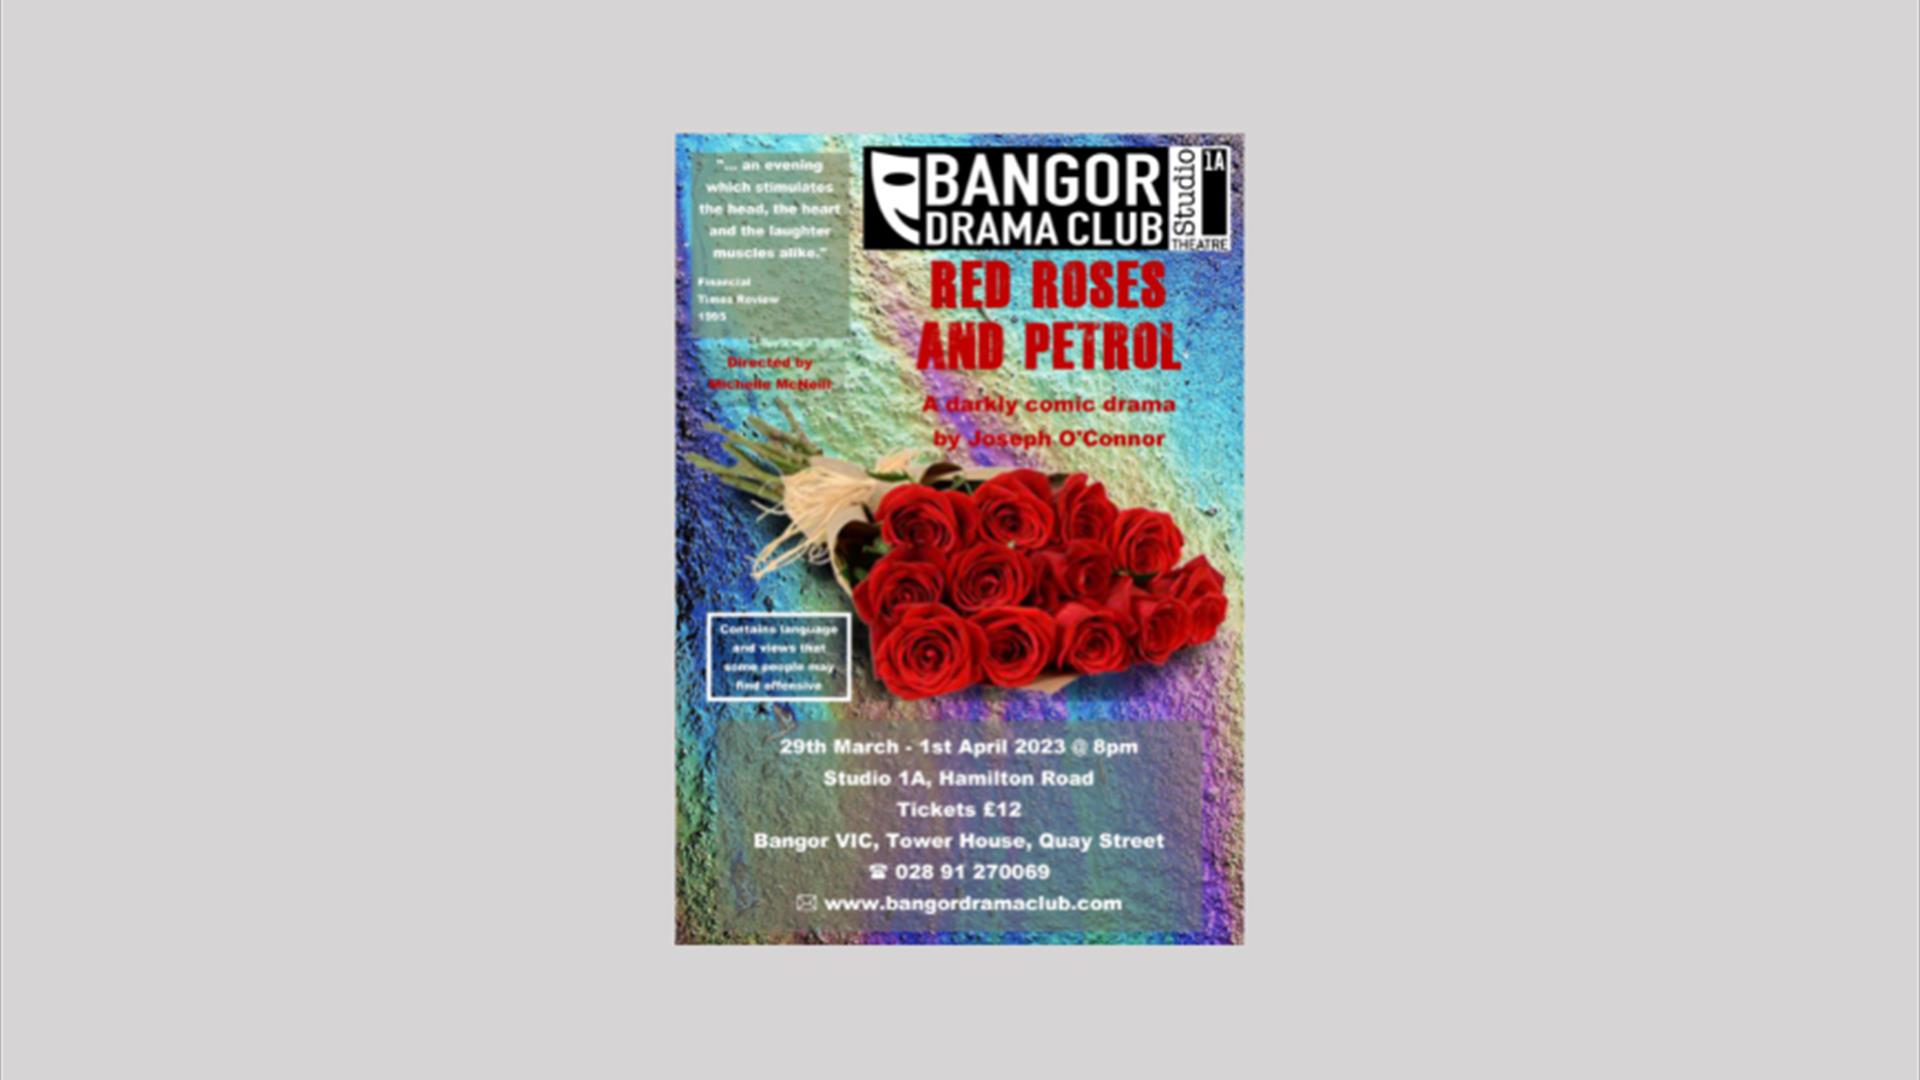 Red Roses and Petrol by Joseph O’Connor